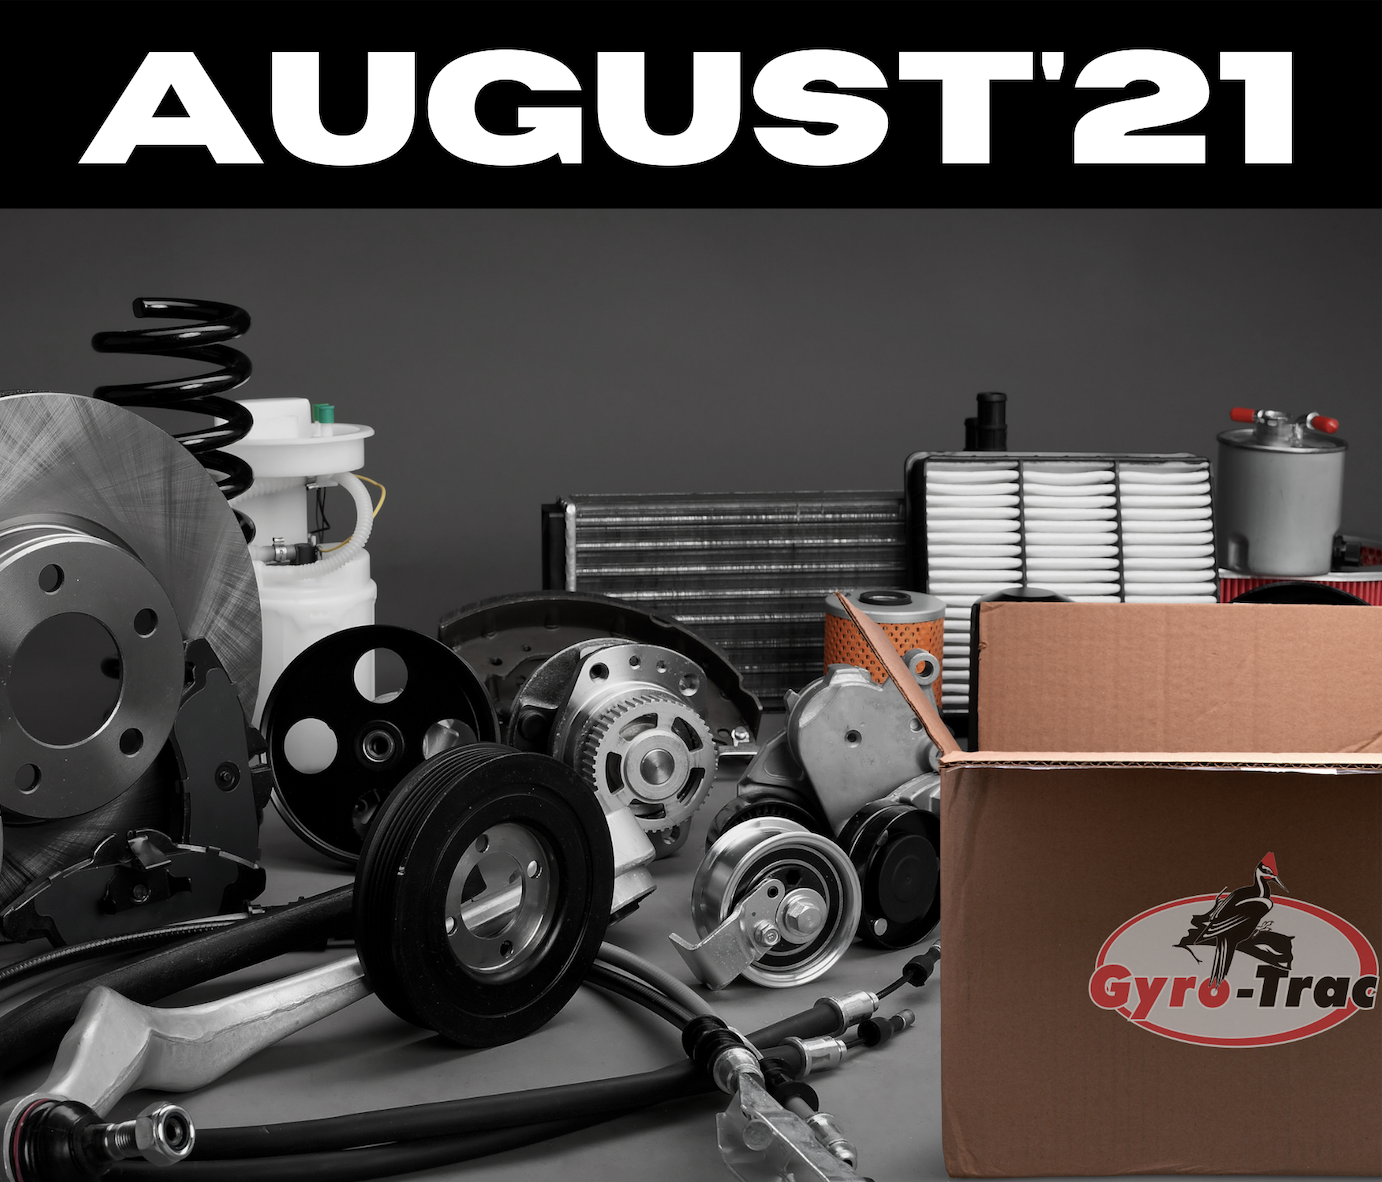 MONTHLY PARTS SALE - AUGUST 2021 - GYRO-TRAC FORESTRY MULCHING EQUIPMENT